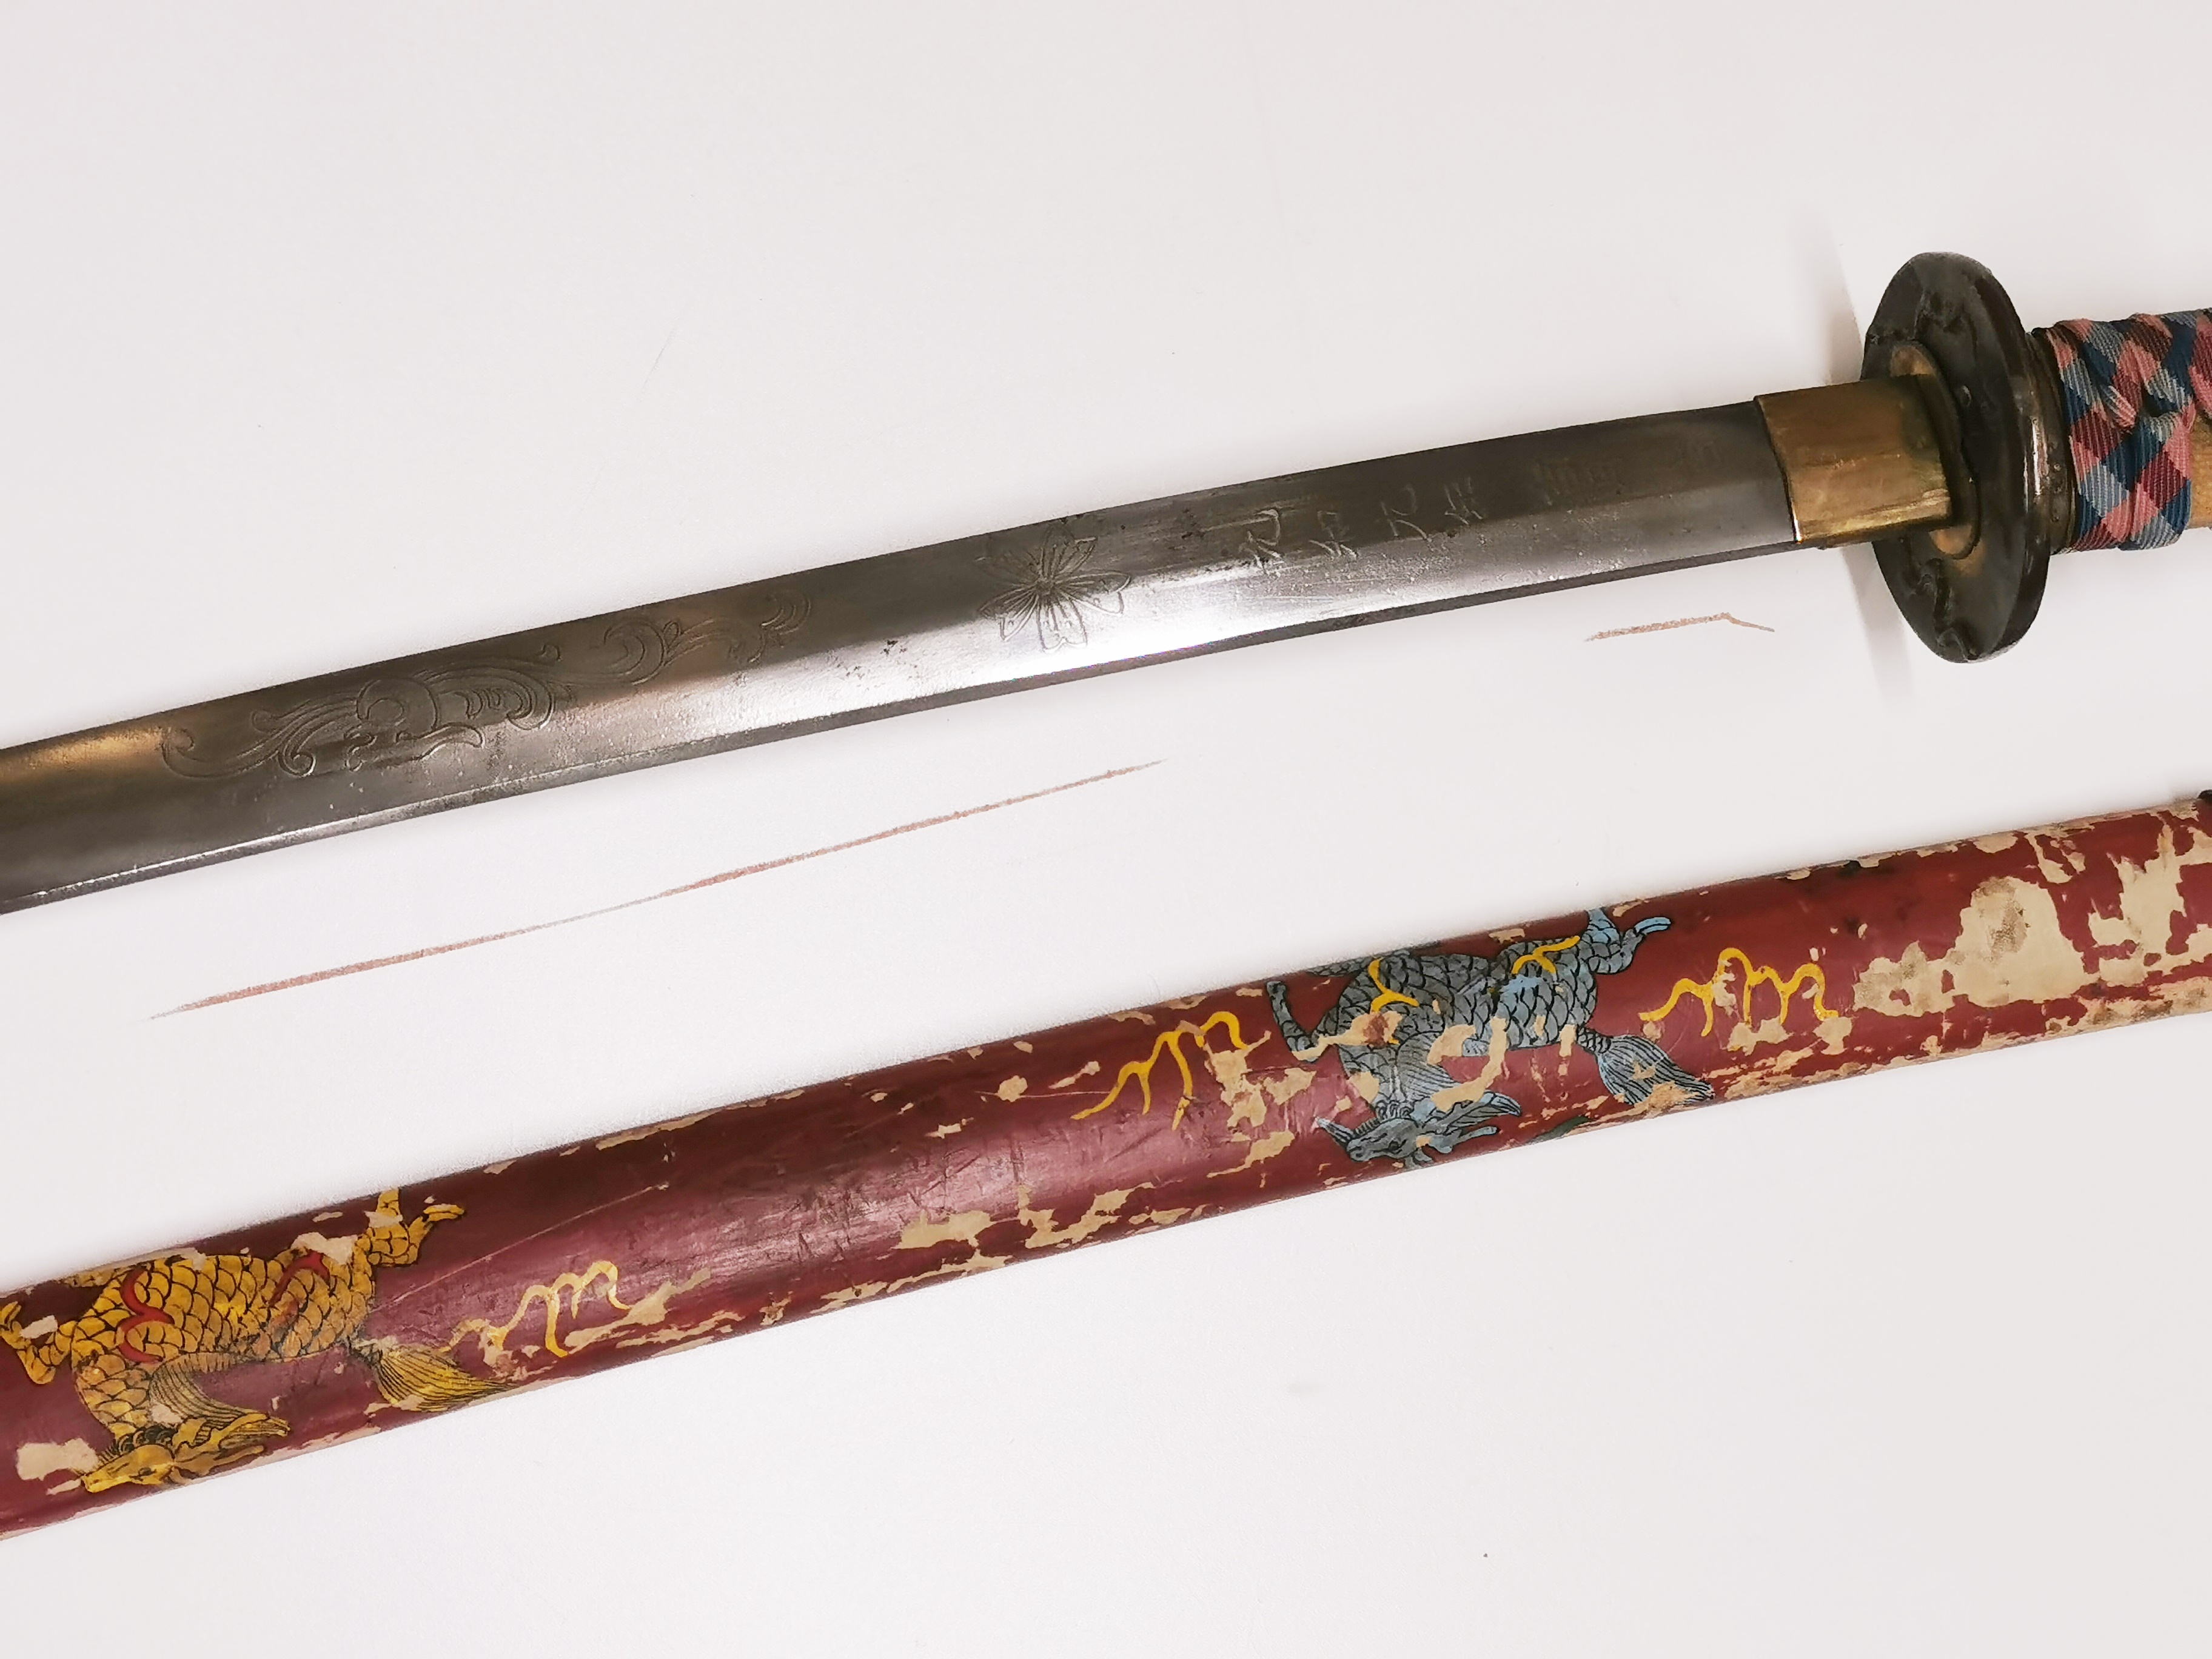 A 20thC Japanese style katana sword with painted saya, ray skin hilt and a bronze tsuba and - Image 4 of 4